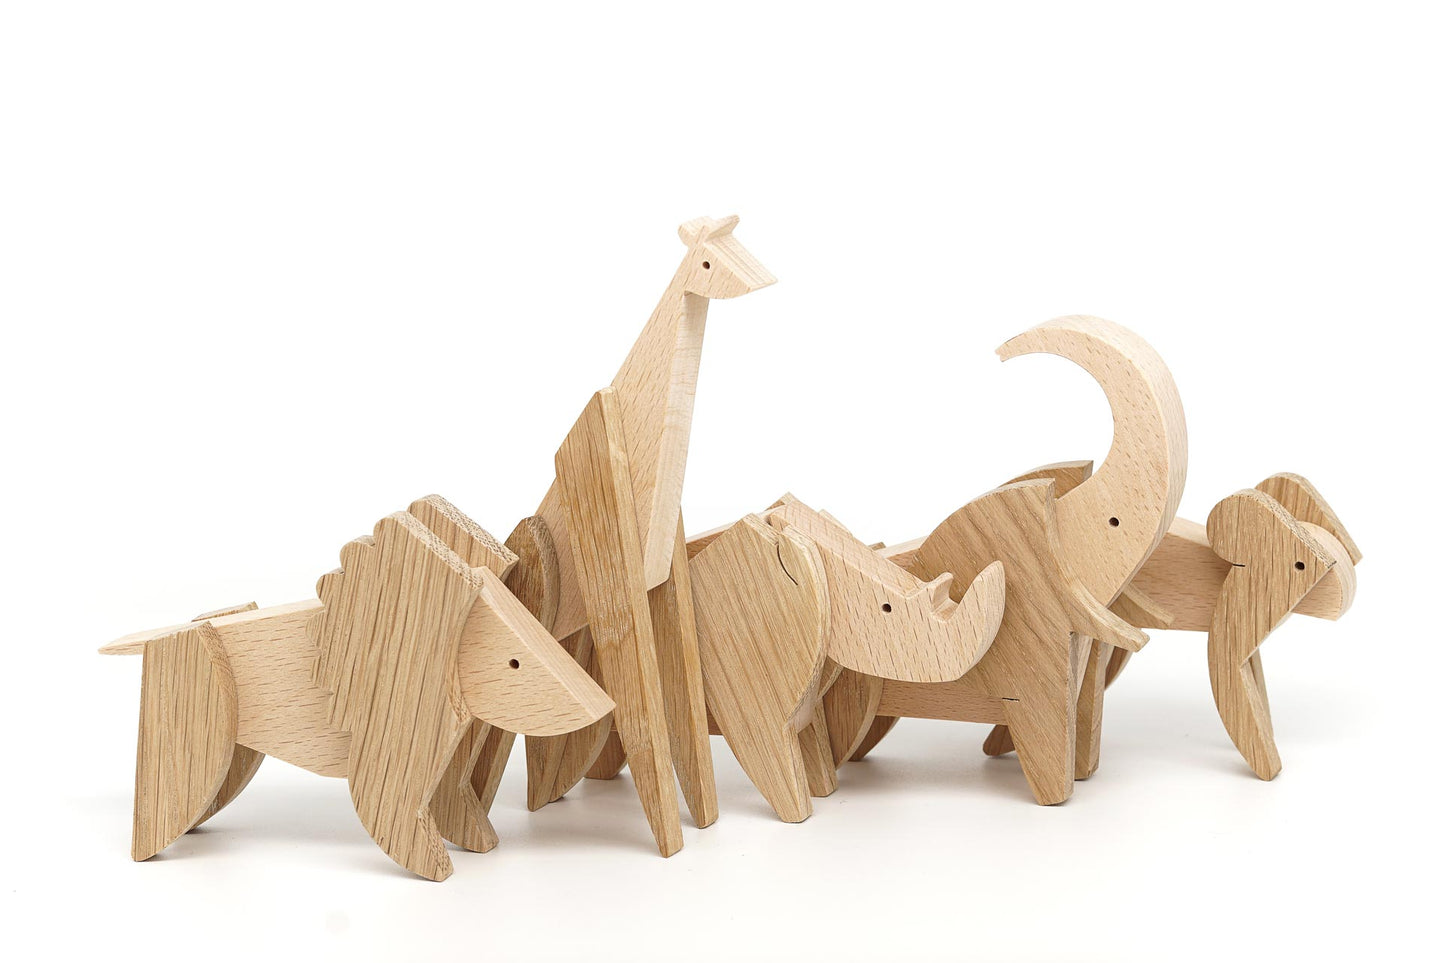 Magnetic wooden toy animals assembled from various shapes and forms- set of 5 with elephant, monkey, rhinoceros, lion and giraffe